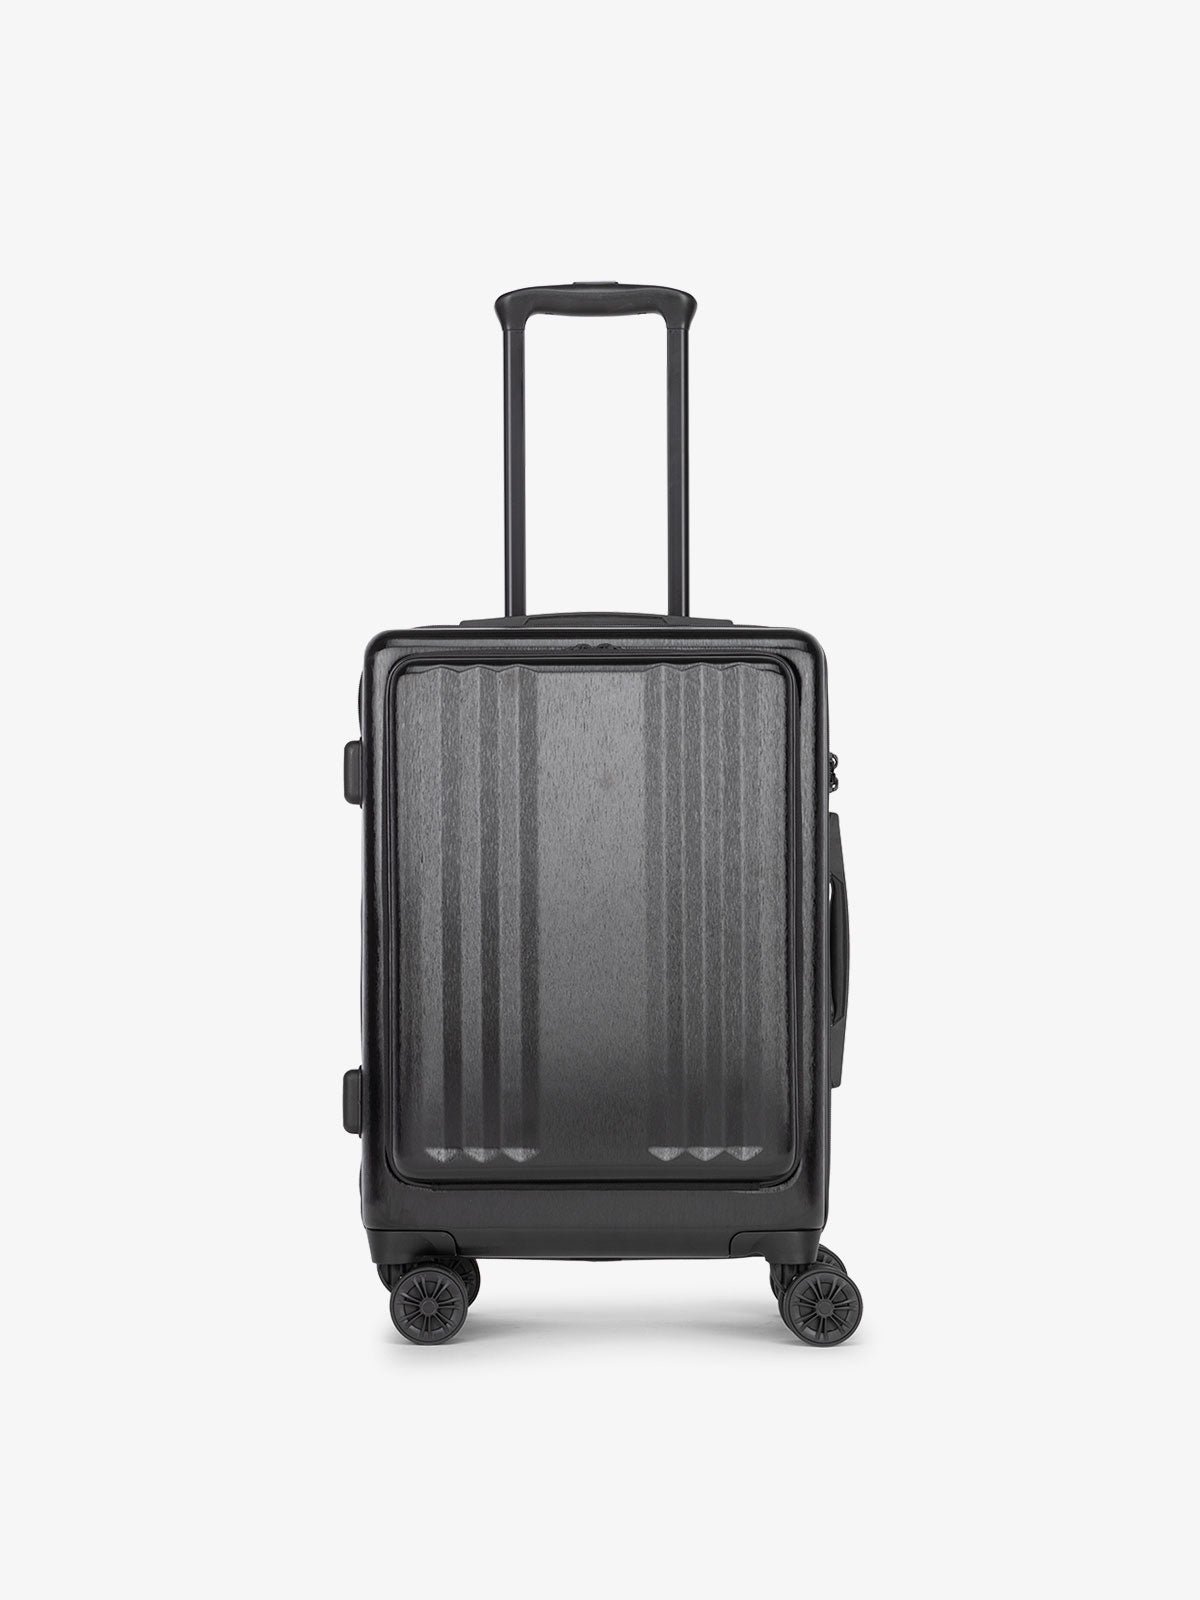 CALPAK Ambeur carry-on suitcase with pocket, TSA lock and 360 spinner wheels in black